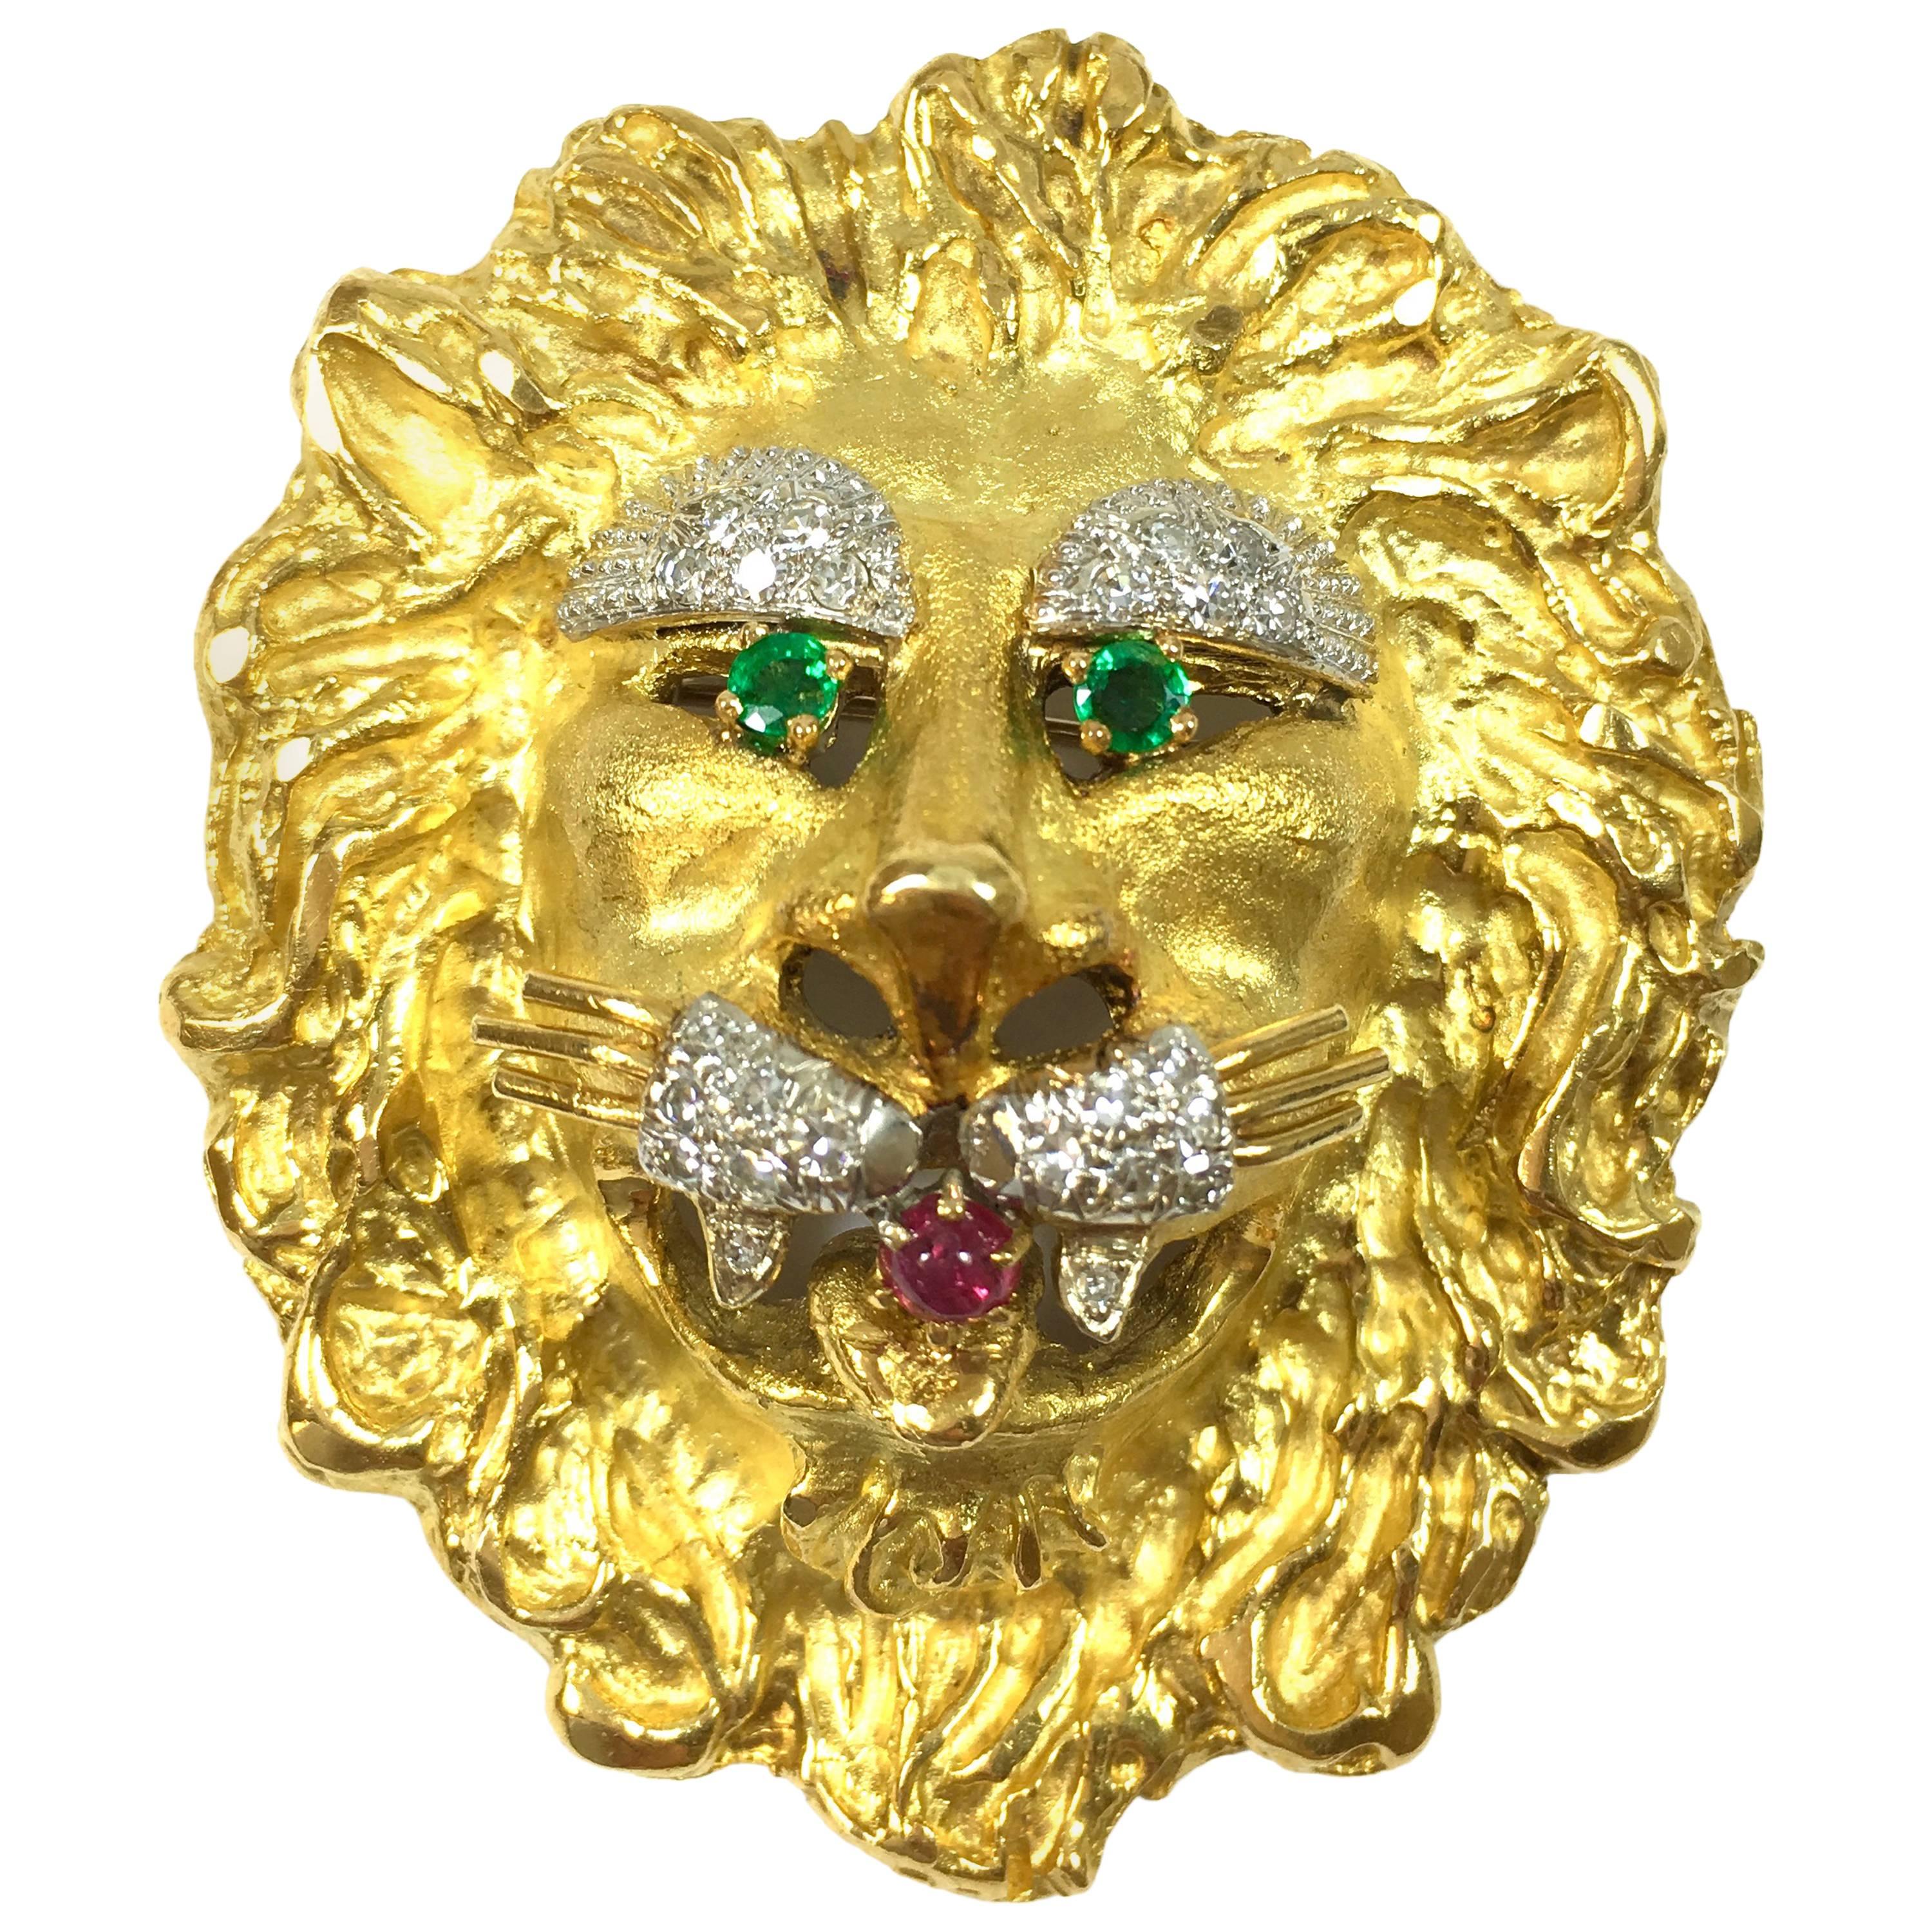 Hammerman Brothers Emerald Ruby Diamond Gold Lion Pendant Brooch For Sale